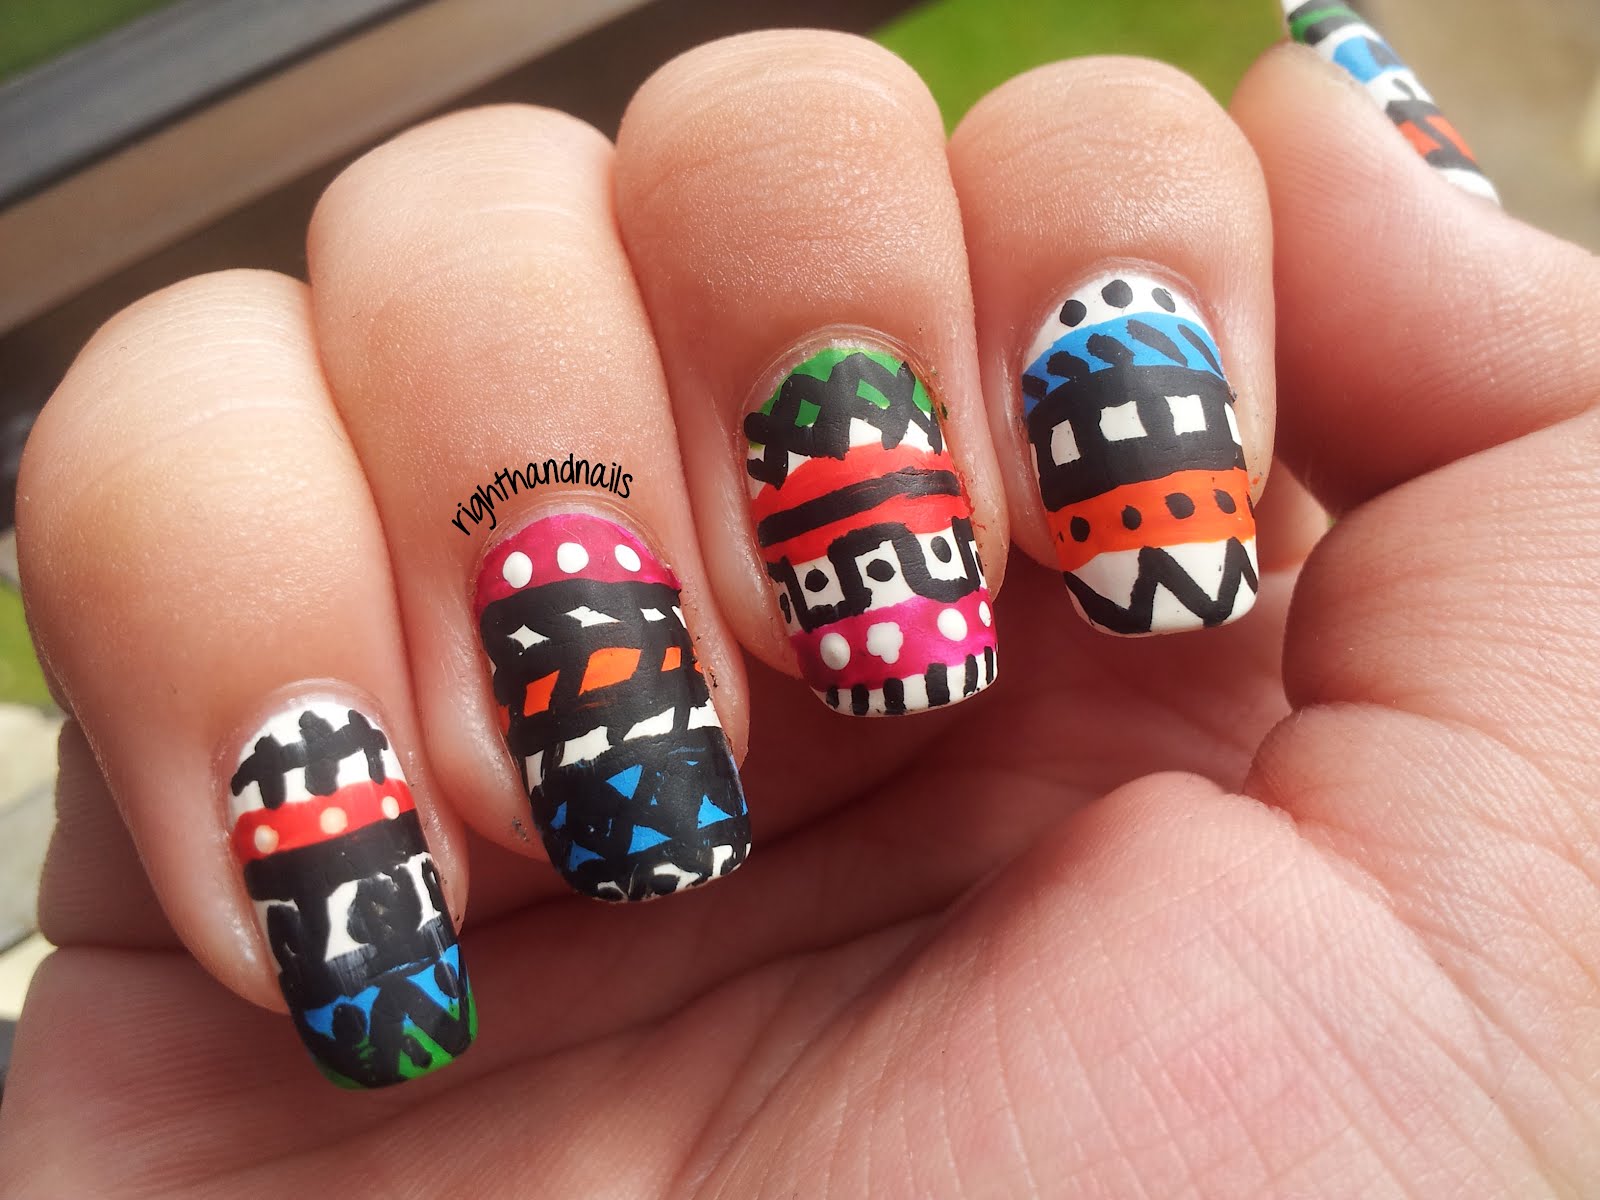 6. Tribal Nail Art Designs for Long Nails - wide 8